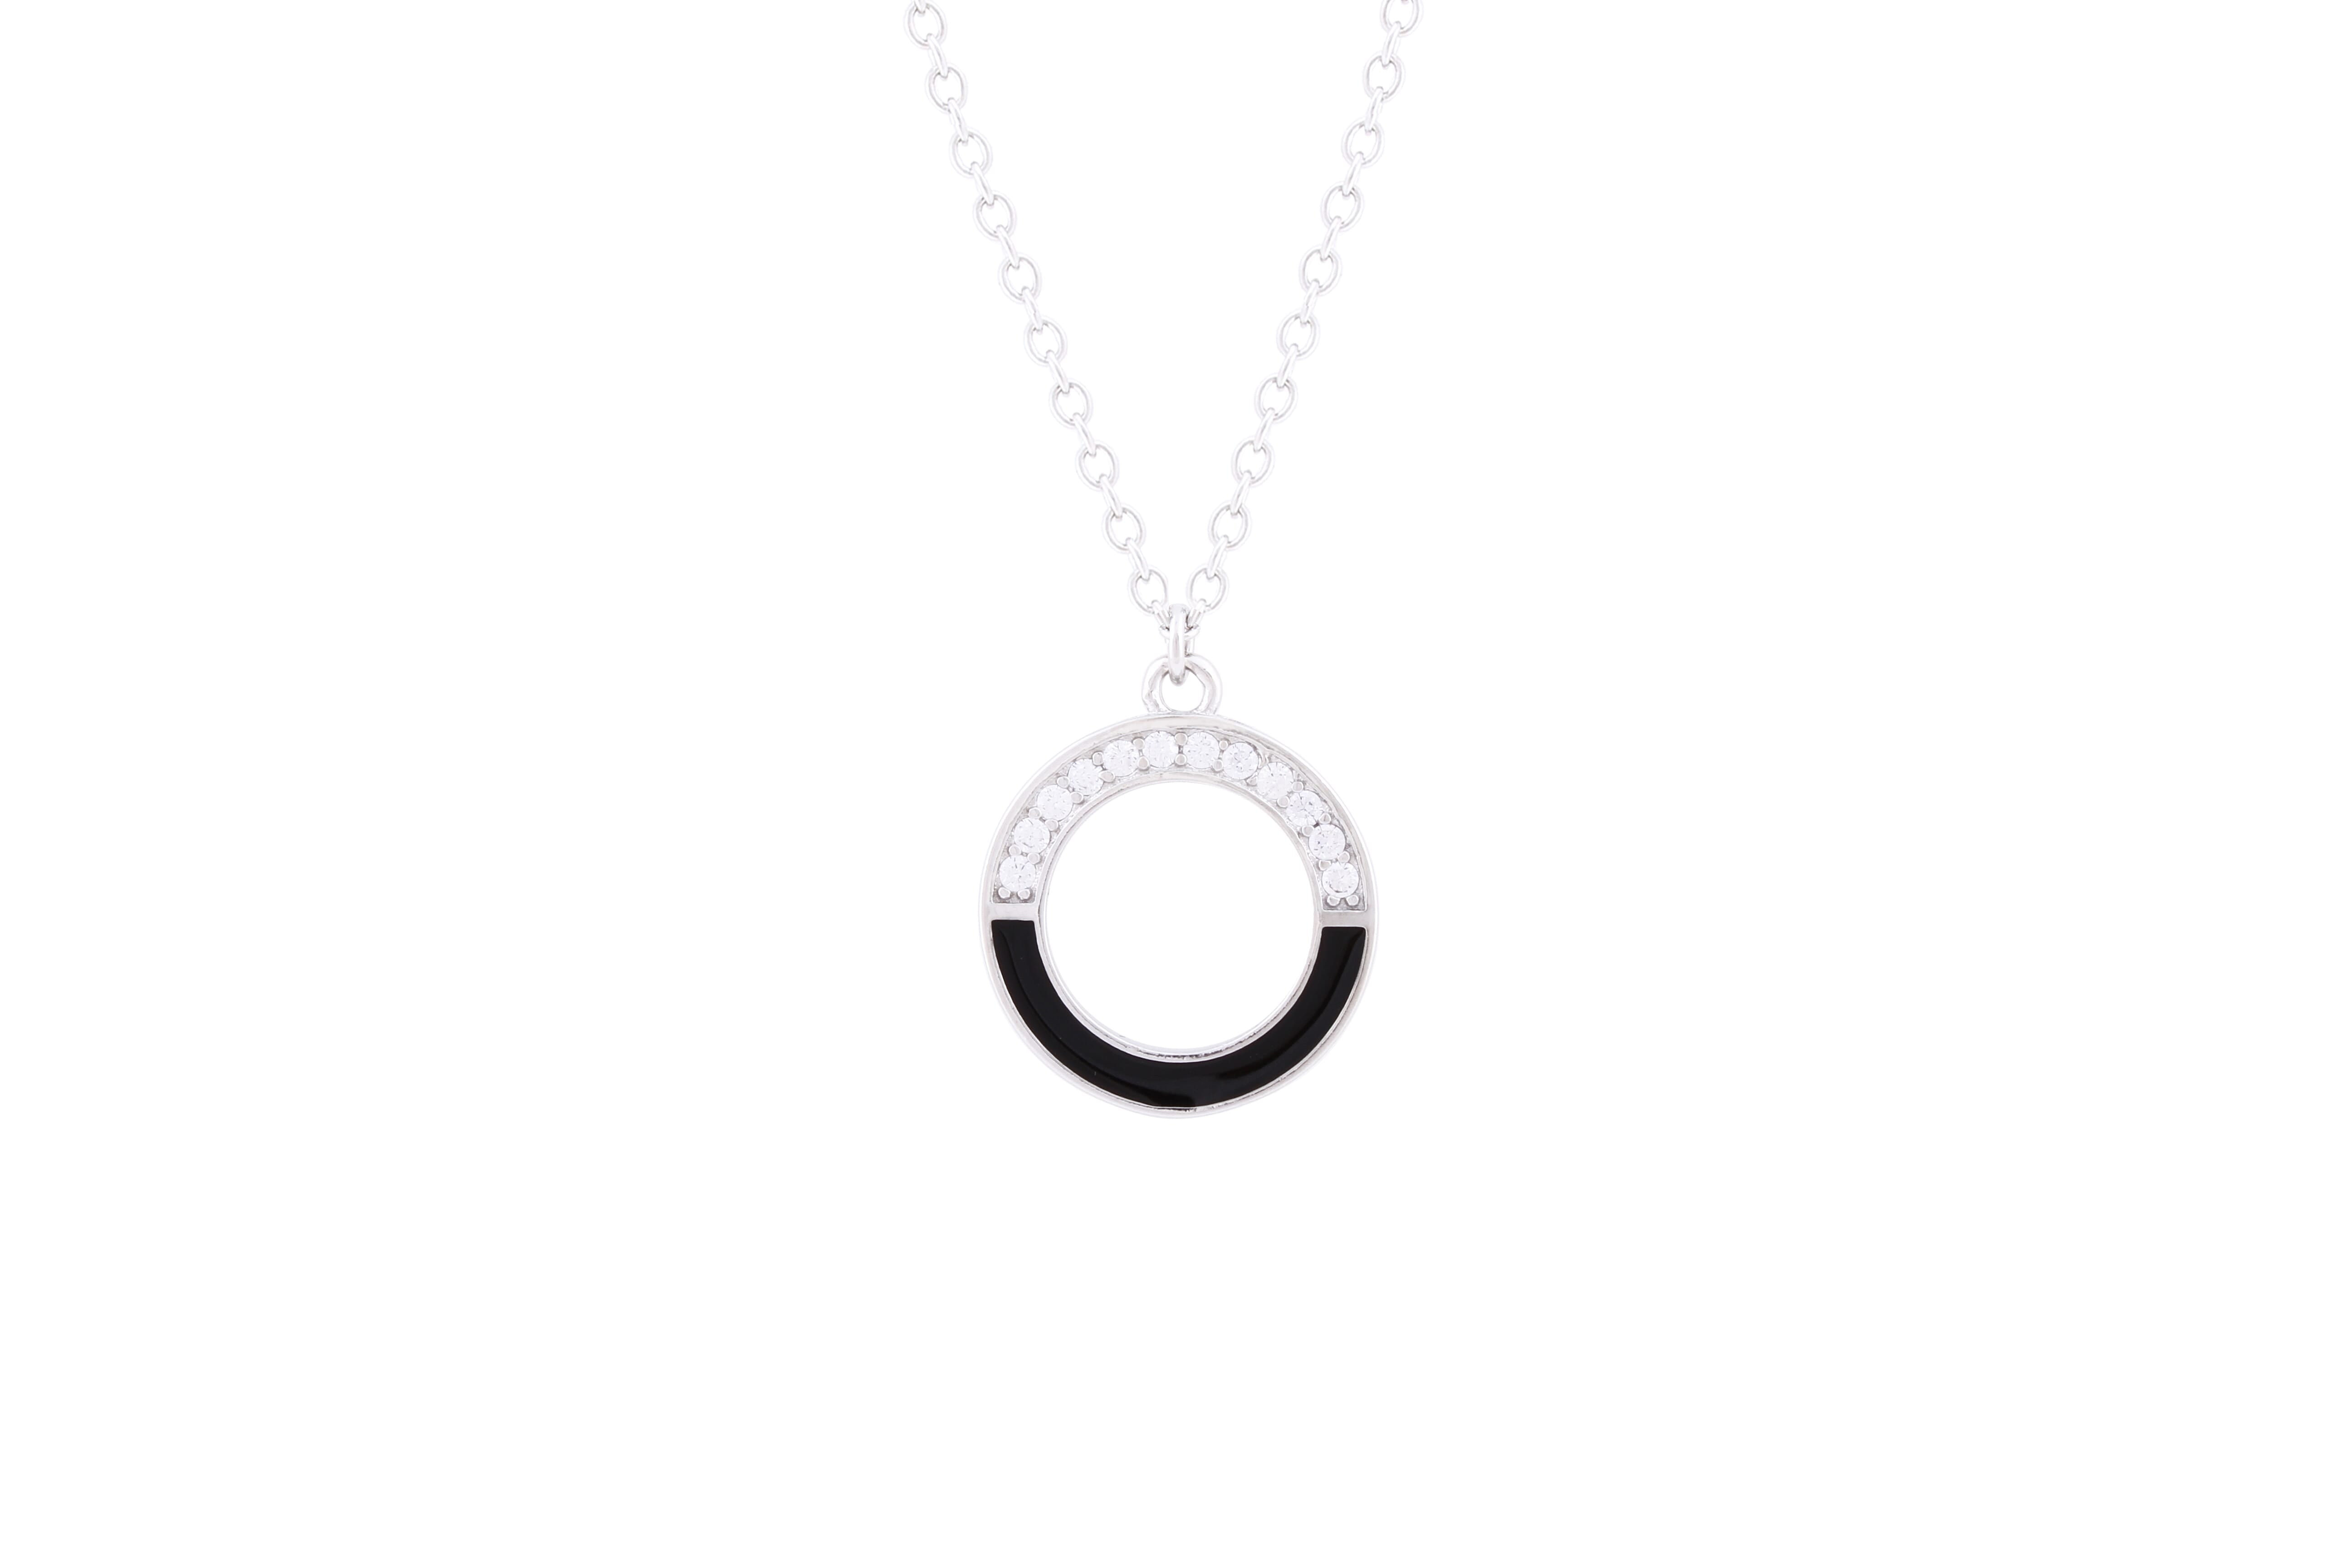 Asfour Sterling Silver Round Necklace Inlaid With Zircon Stones ND0011